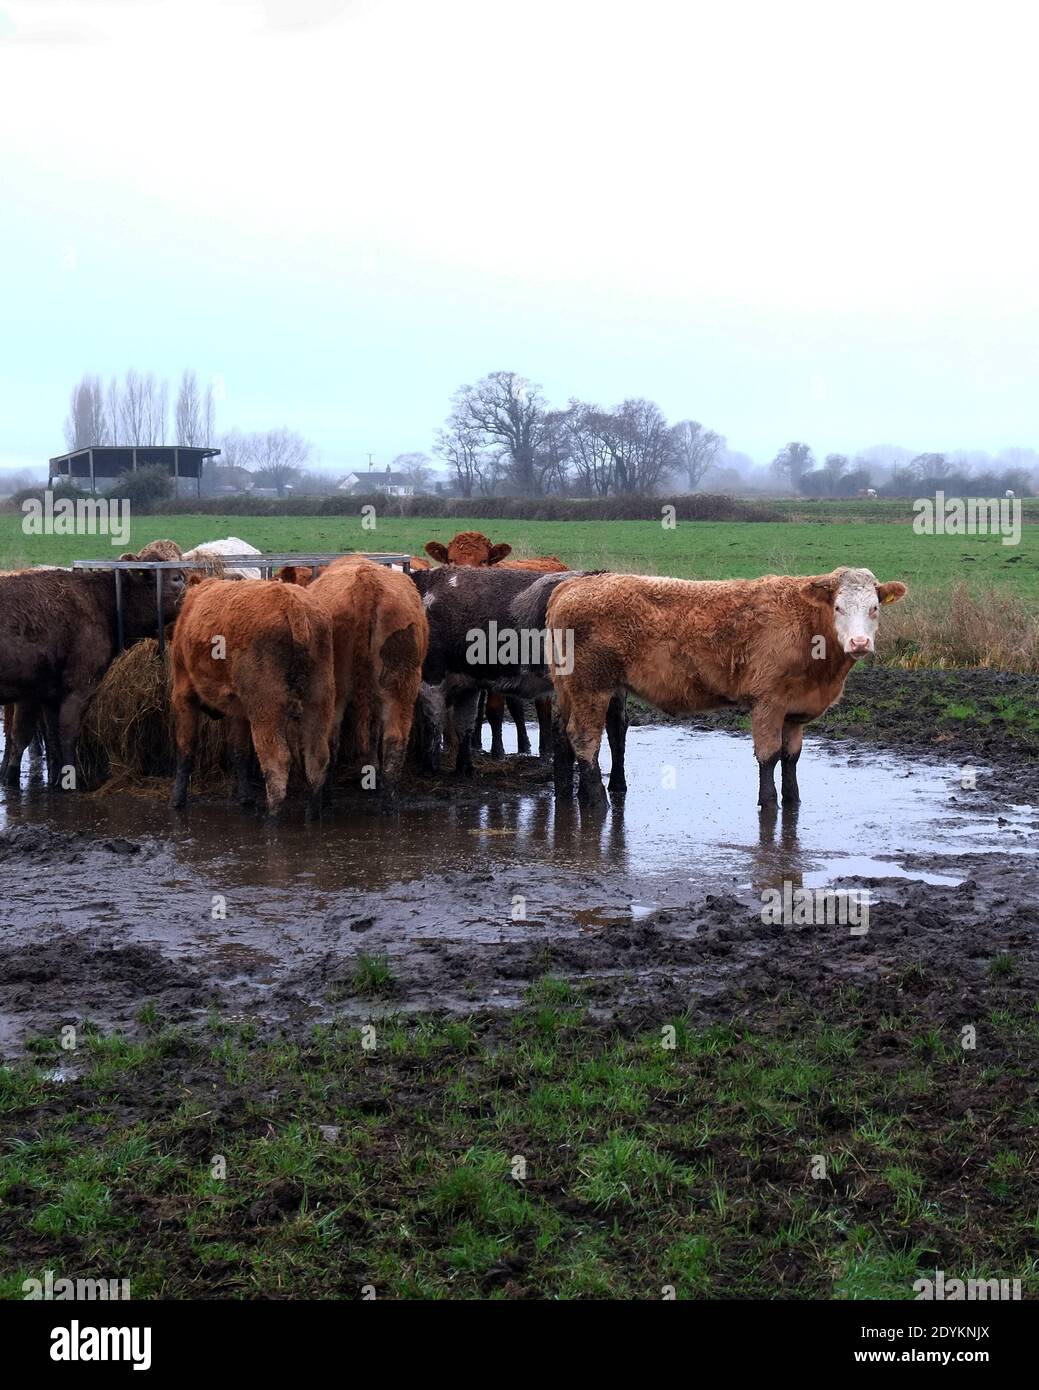 December 2020 - Livestock feeding place in a winter field on a farm in Somerset, UK. Stock Photo